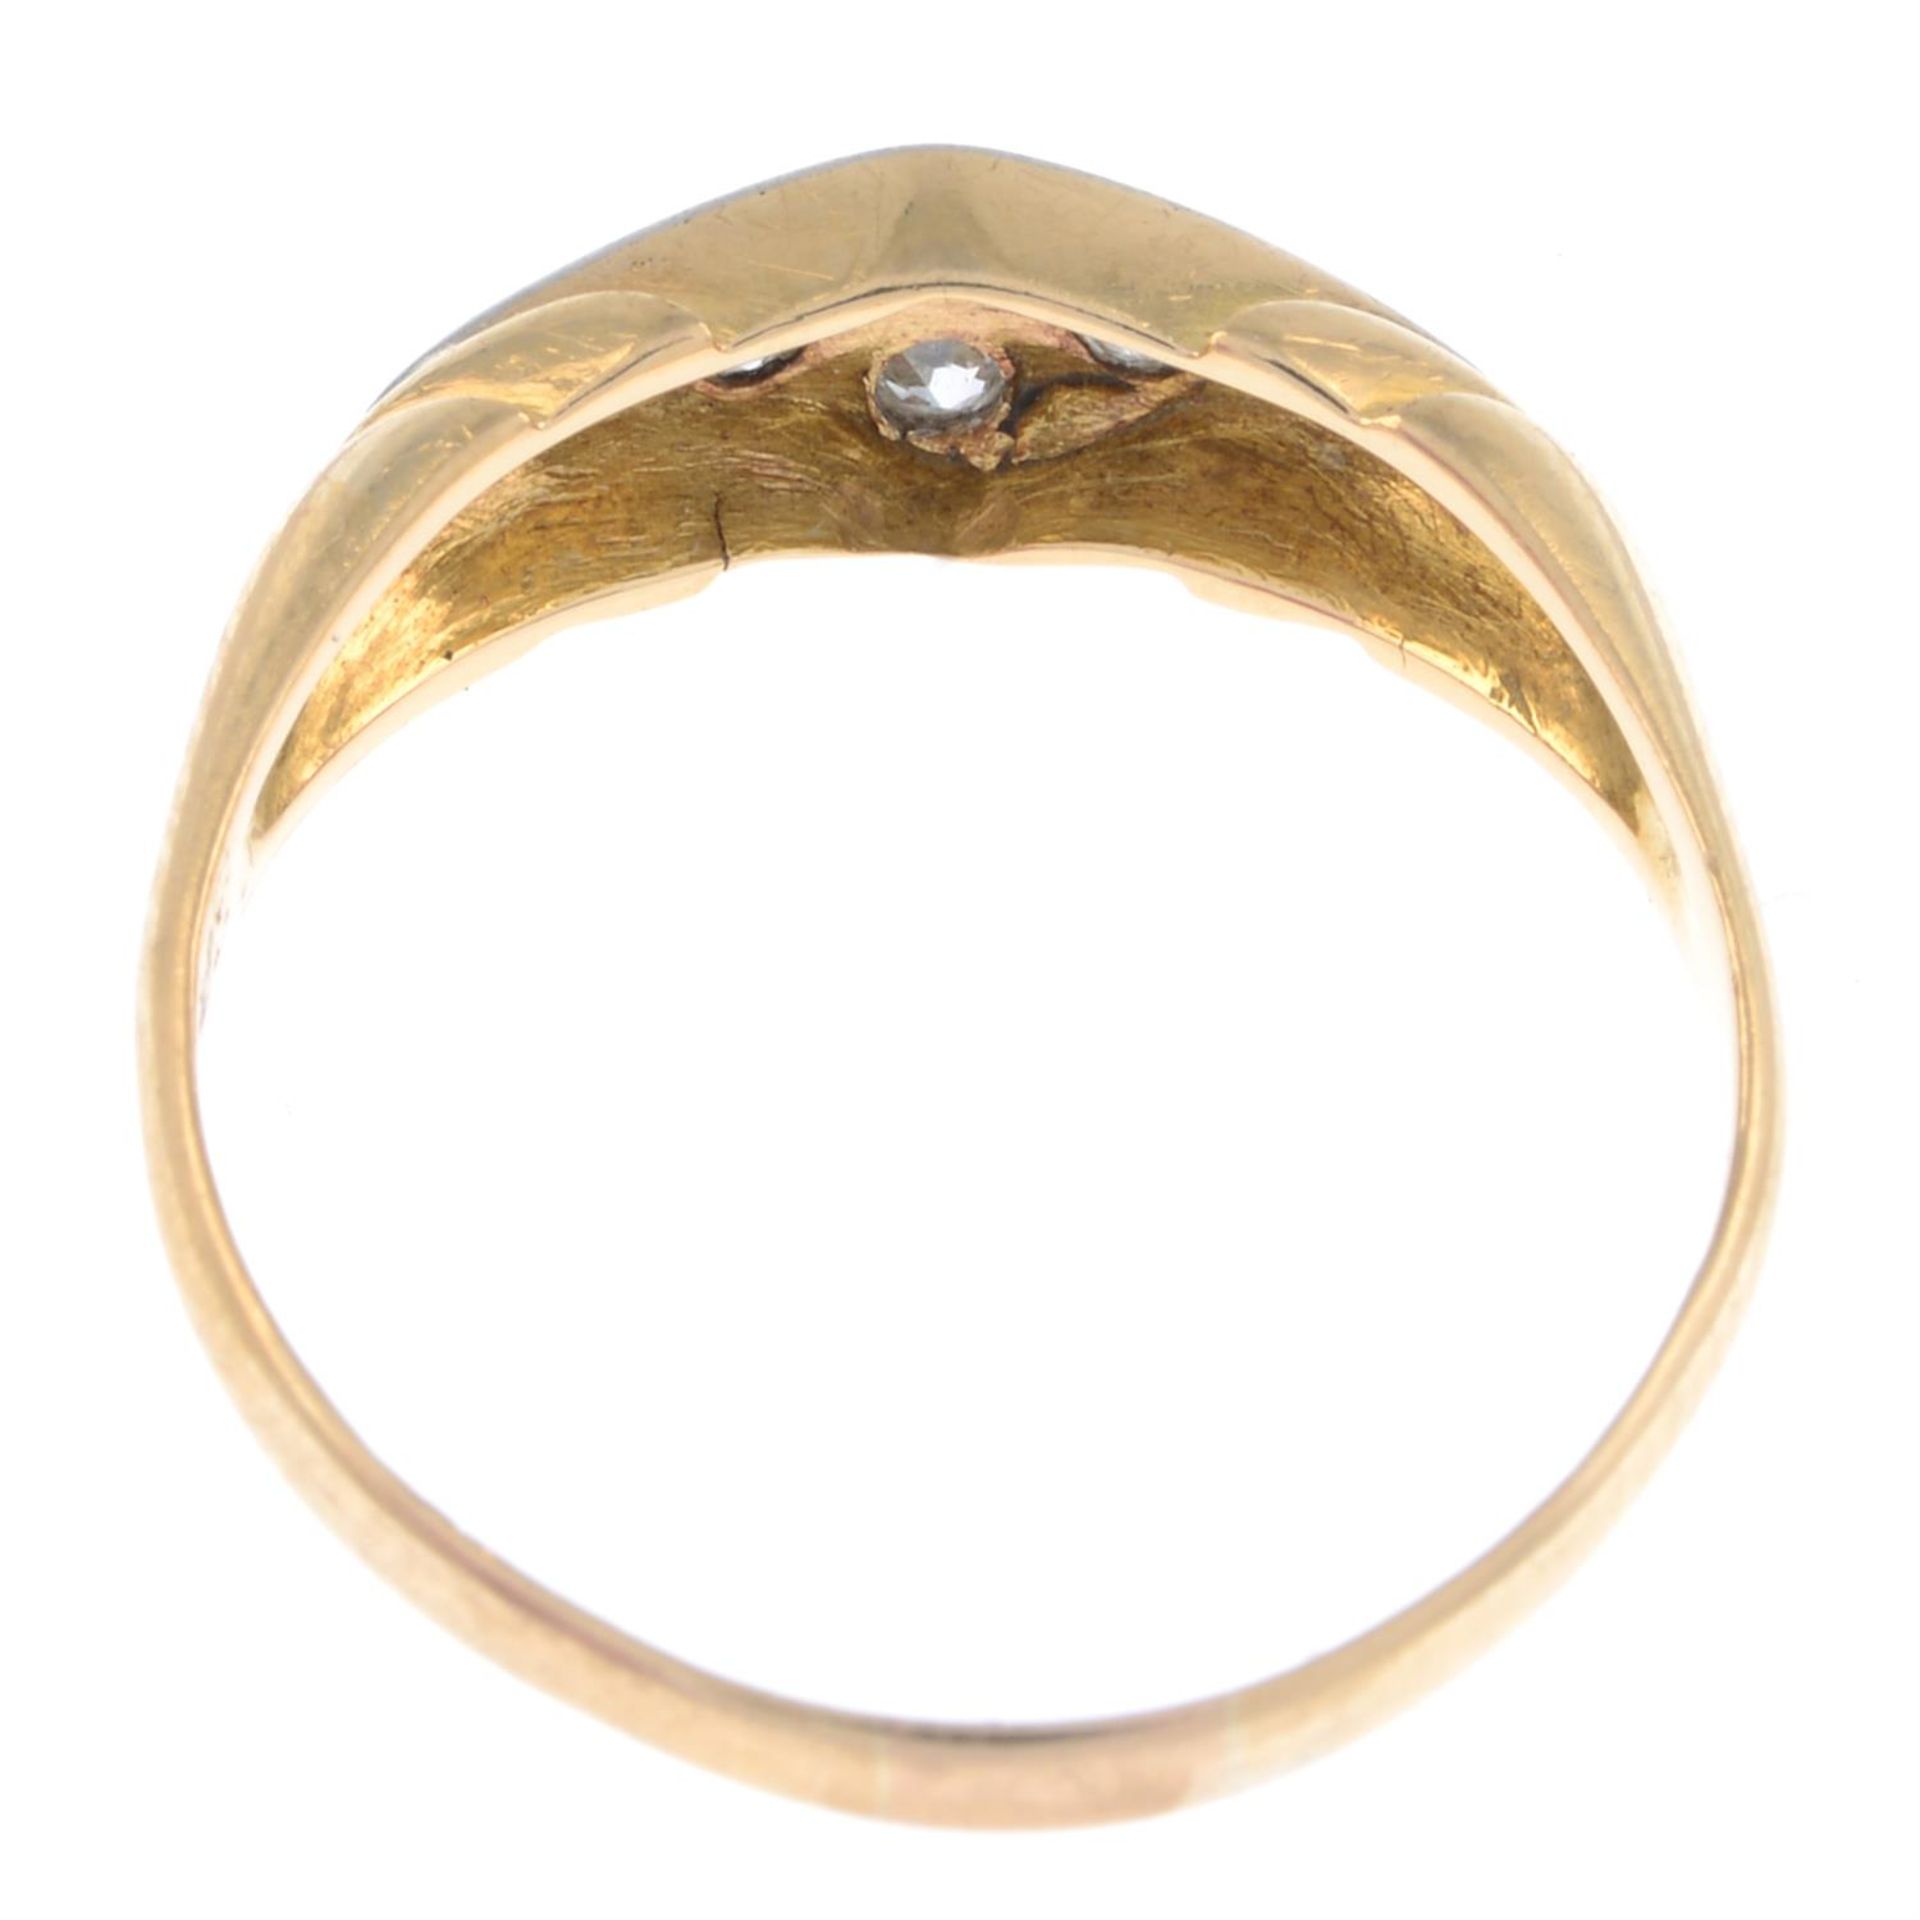 Early 20th century old-cut diamond ring - Image 2 of 2